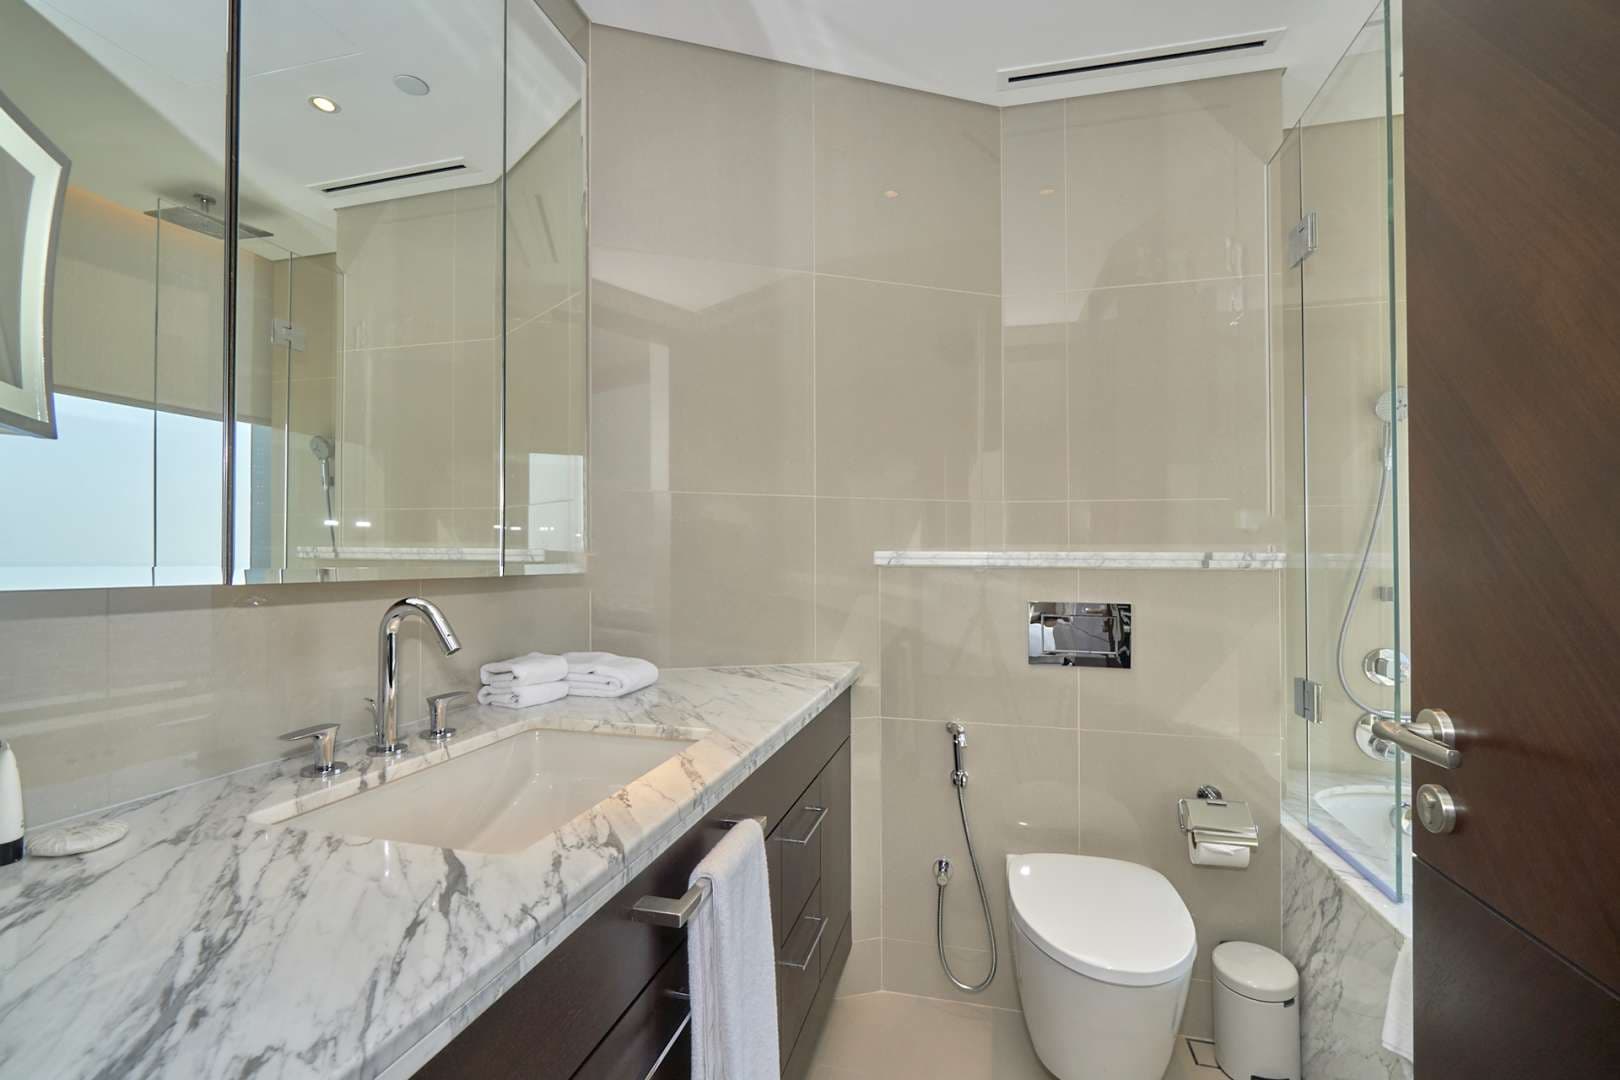 3 Bedroom Apartment For Sale The Address Sky View Towers Lp09314 138bd74573e10900.jpg